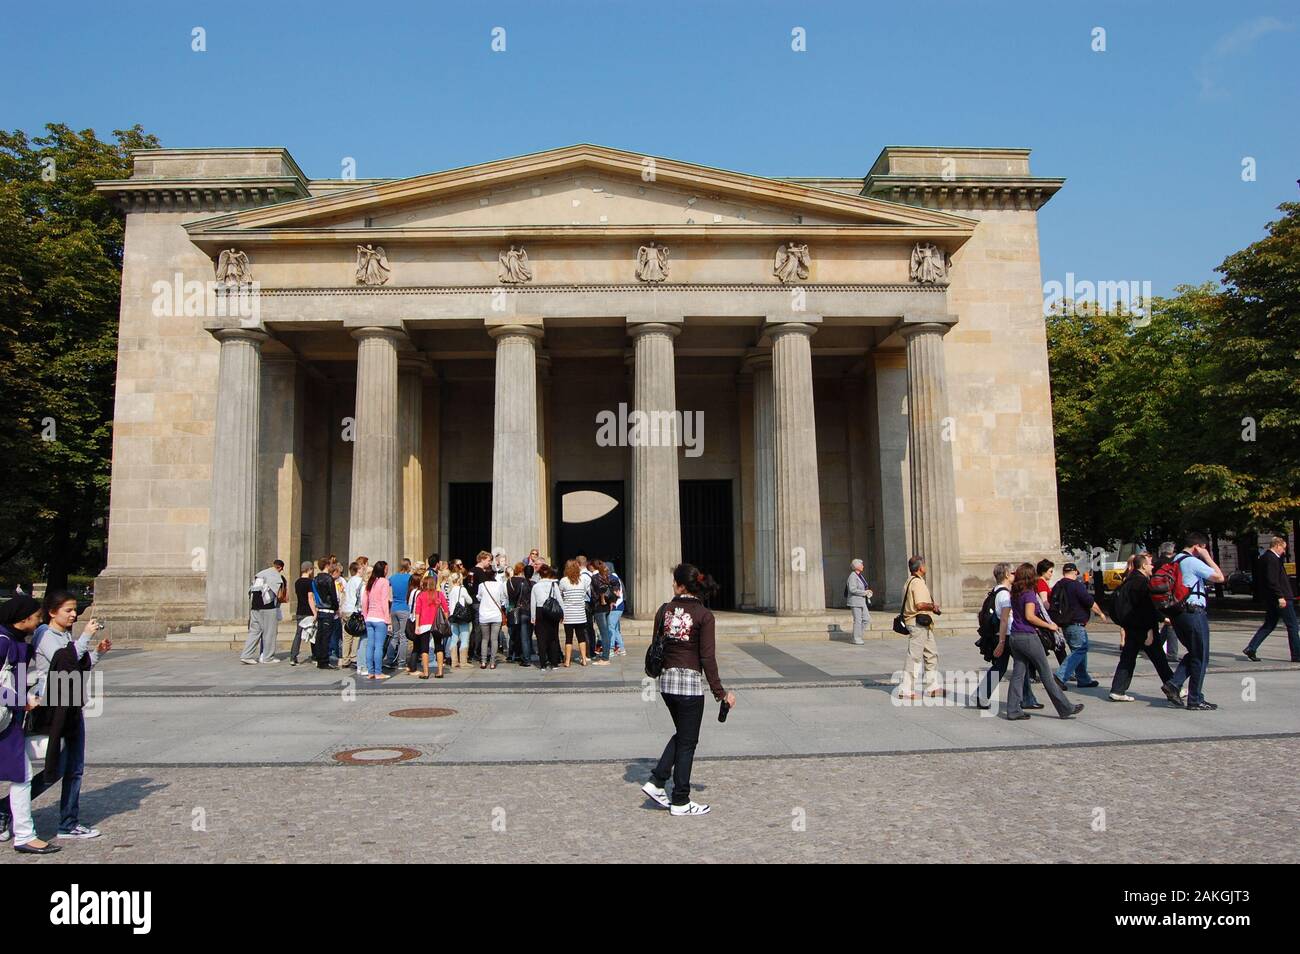 The new guardhouse in Berlin Stock Photo